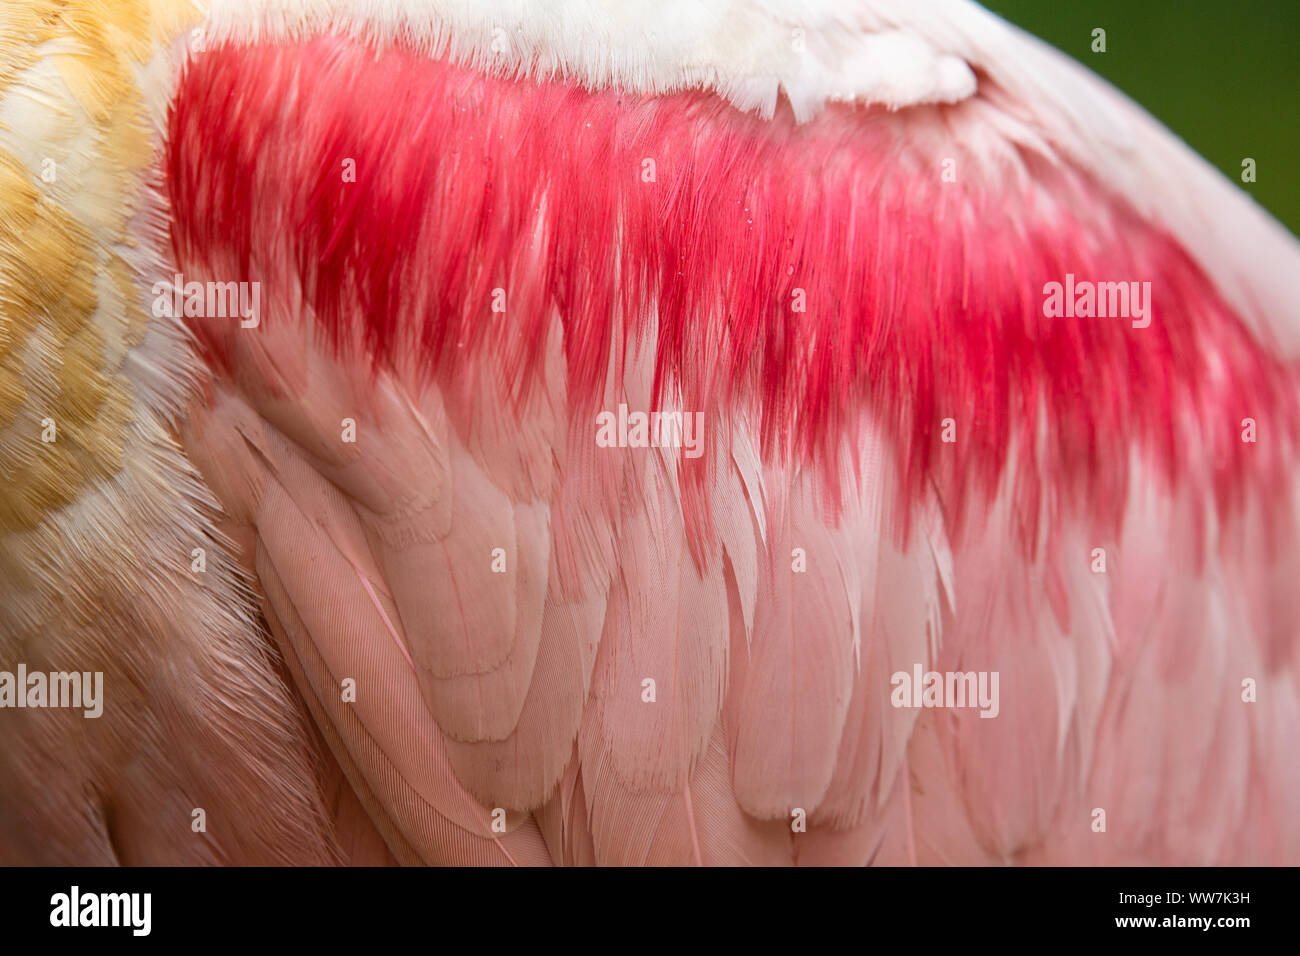 Detail the wing feathers of a Roseate Spoonbill (Platalea ajaja) at Ellie Schiller Homosassa Springs Wildlife State Park, Florida, USA. Stock Photo